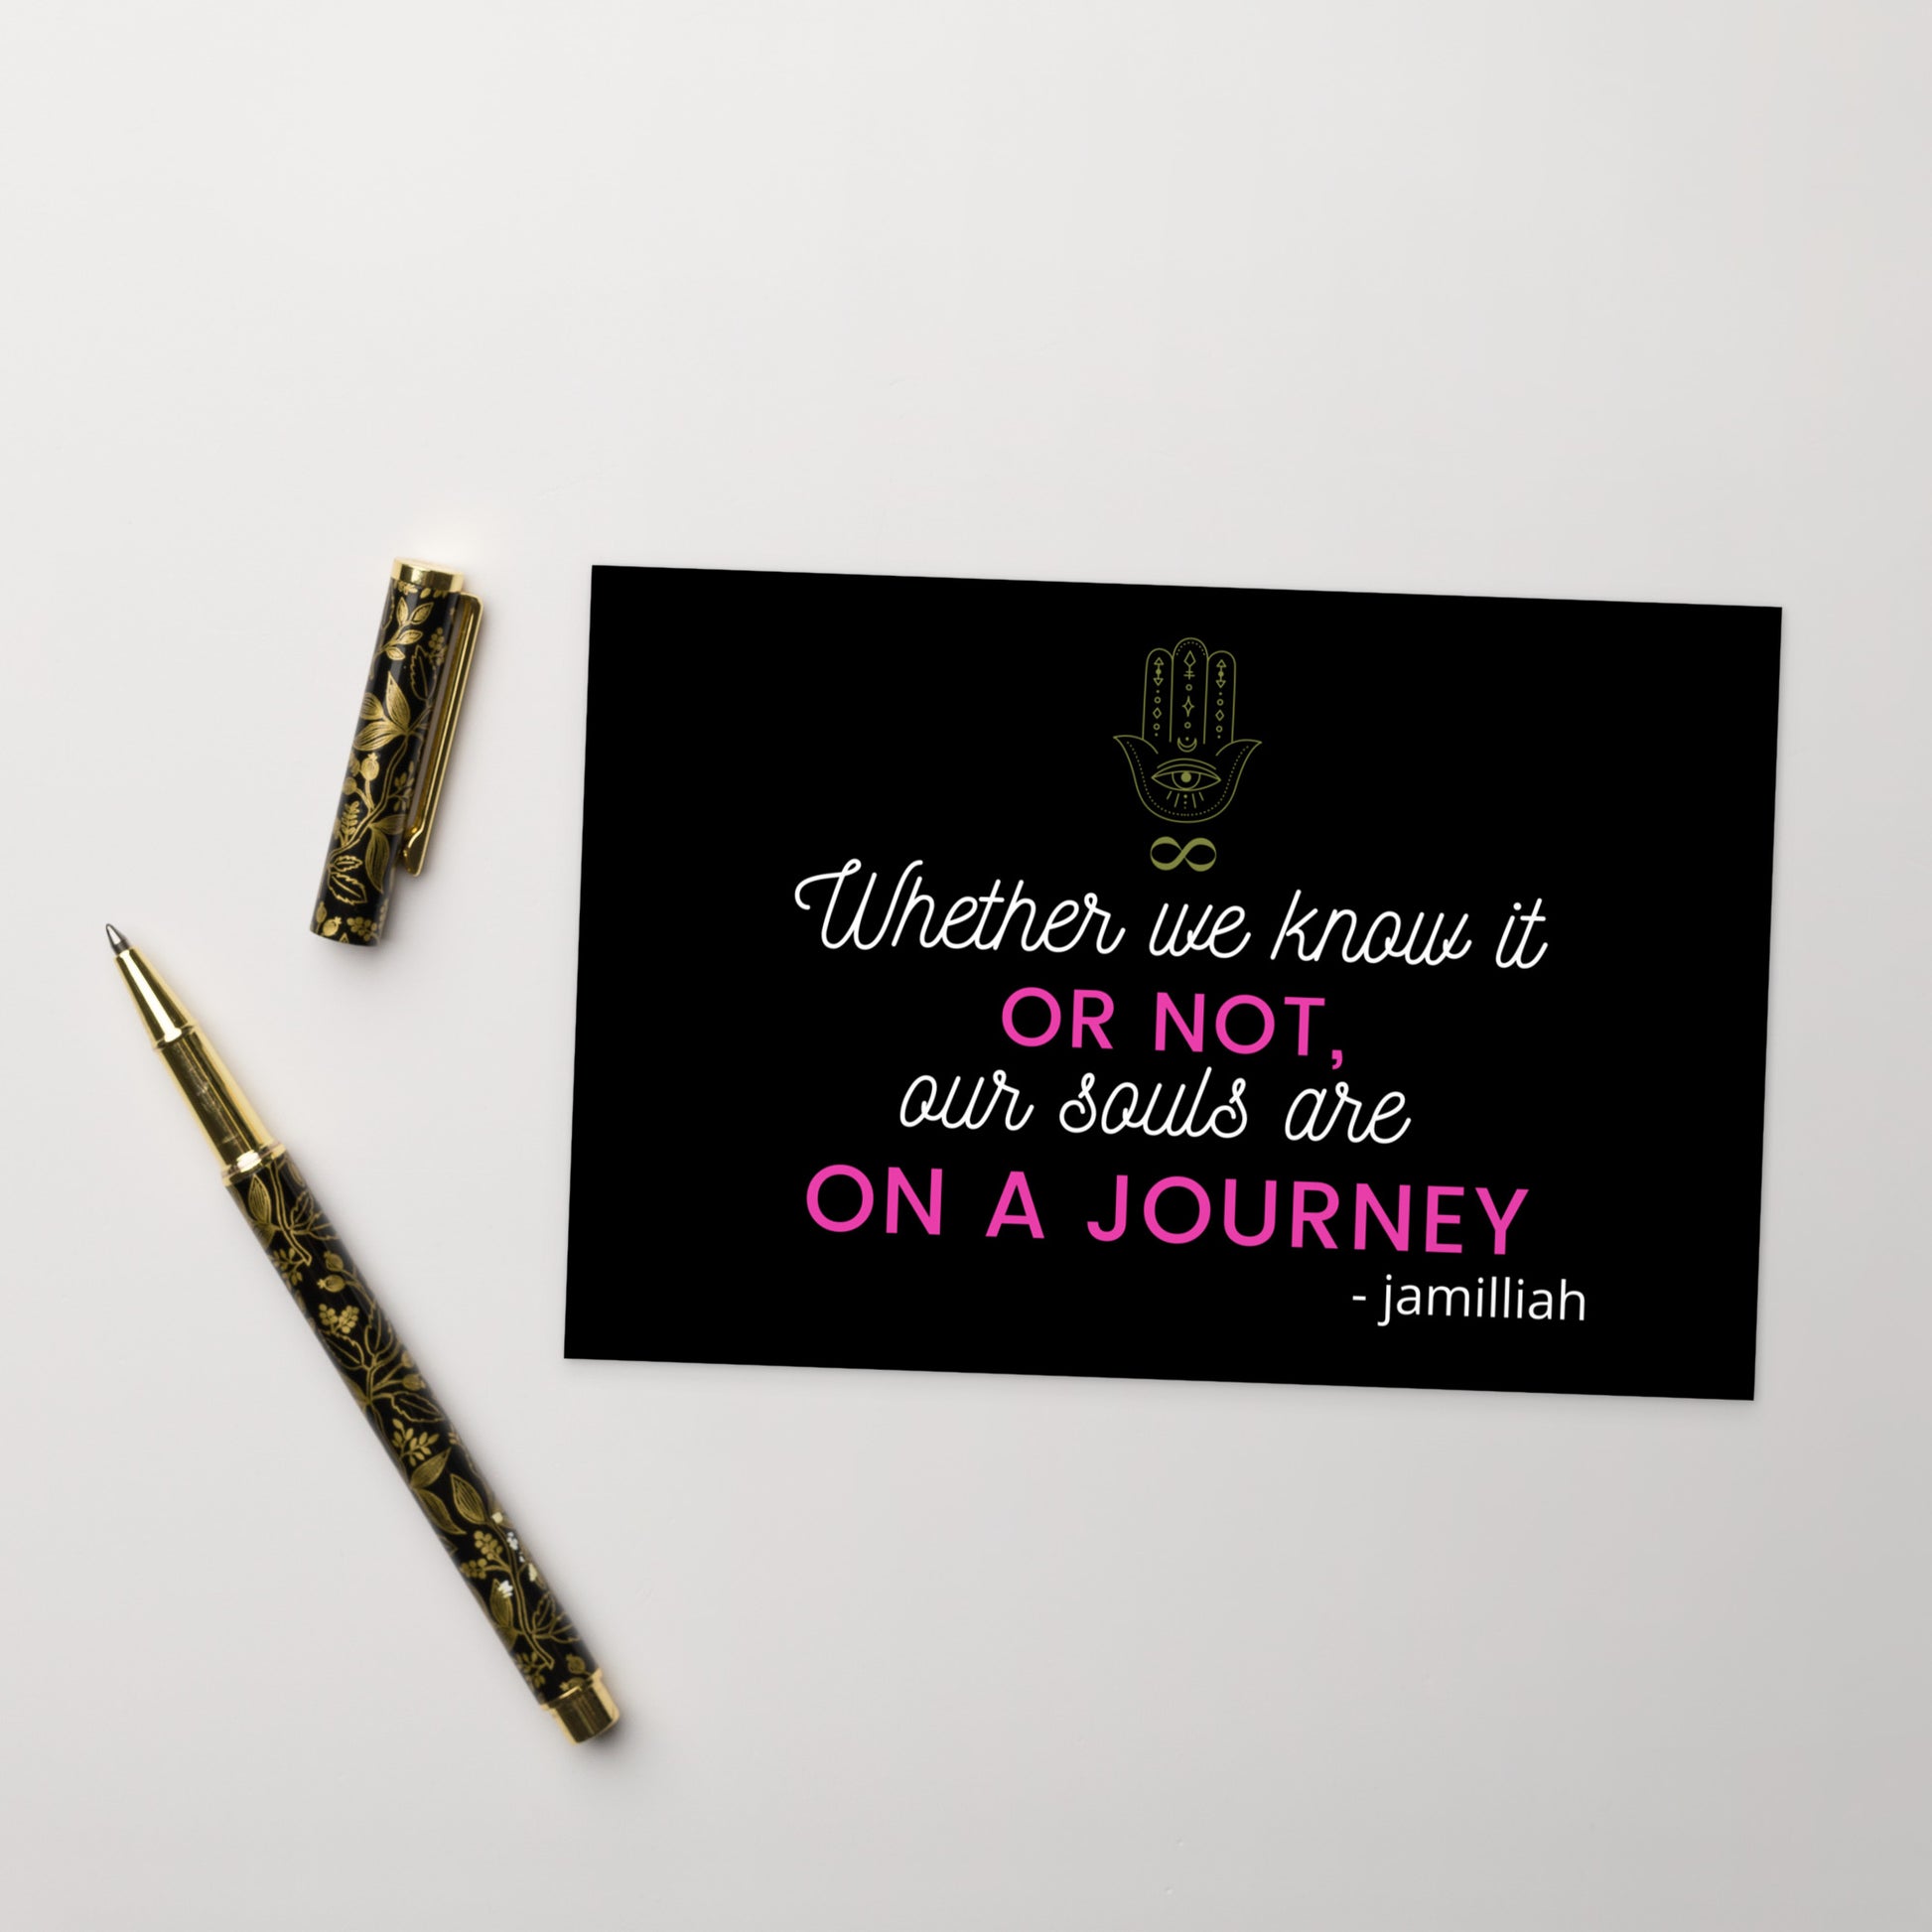 4" x 6", black, glossy, cardboard postcard with pink and white writing, original hamsa hand/infinity symbol brand logo, and wise quote mantra/saying/motto/tagline. "Whether We Know It Or Not, Our Souls Are On A Journey" - Jamilliah. Slogan is "JAMILLIAH'S THE SOUL-PATH JOURNEY PODCAST" tagline. Shown with fancy pen and cap. JAMILLIAH'S WISDOM IS TIMELESS SHOP - wisdomistimeless.com.